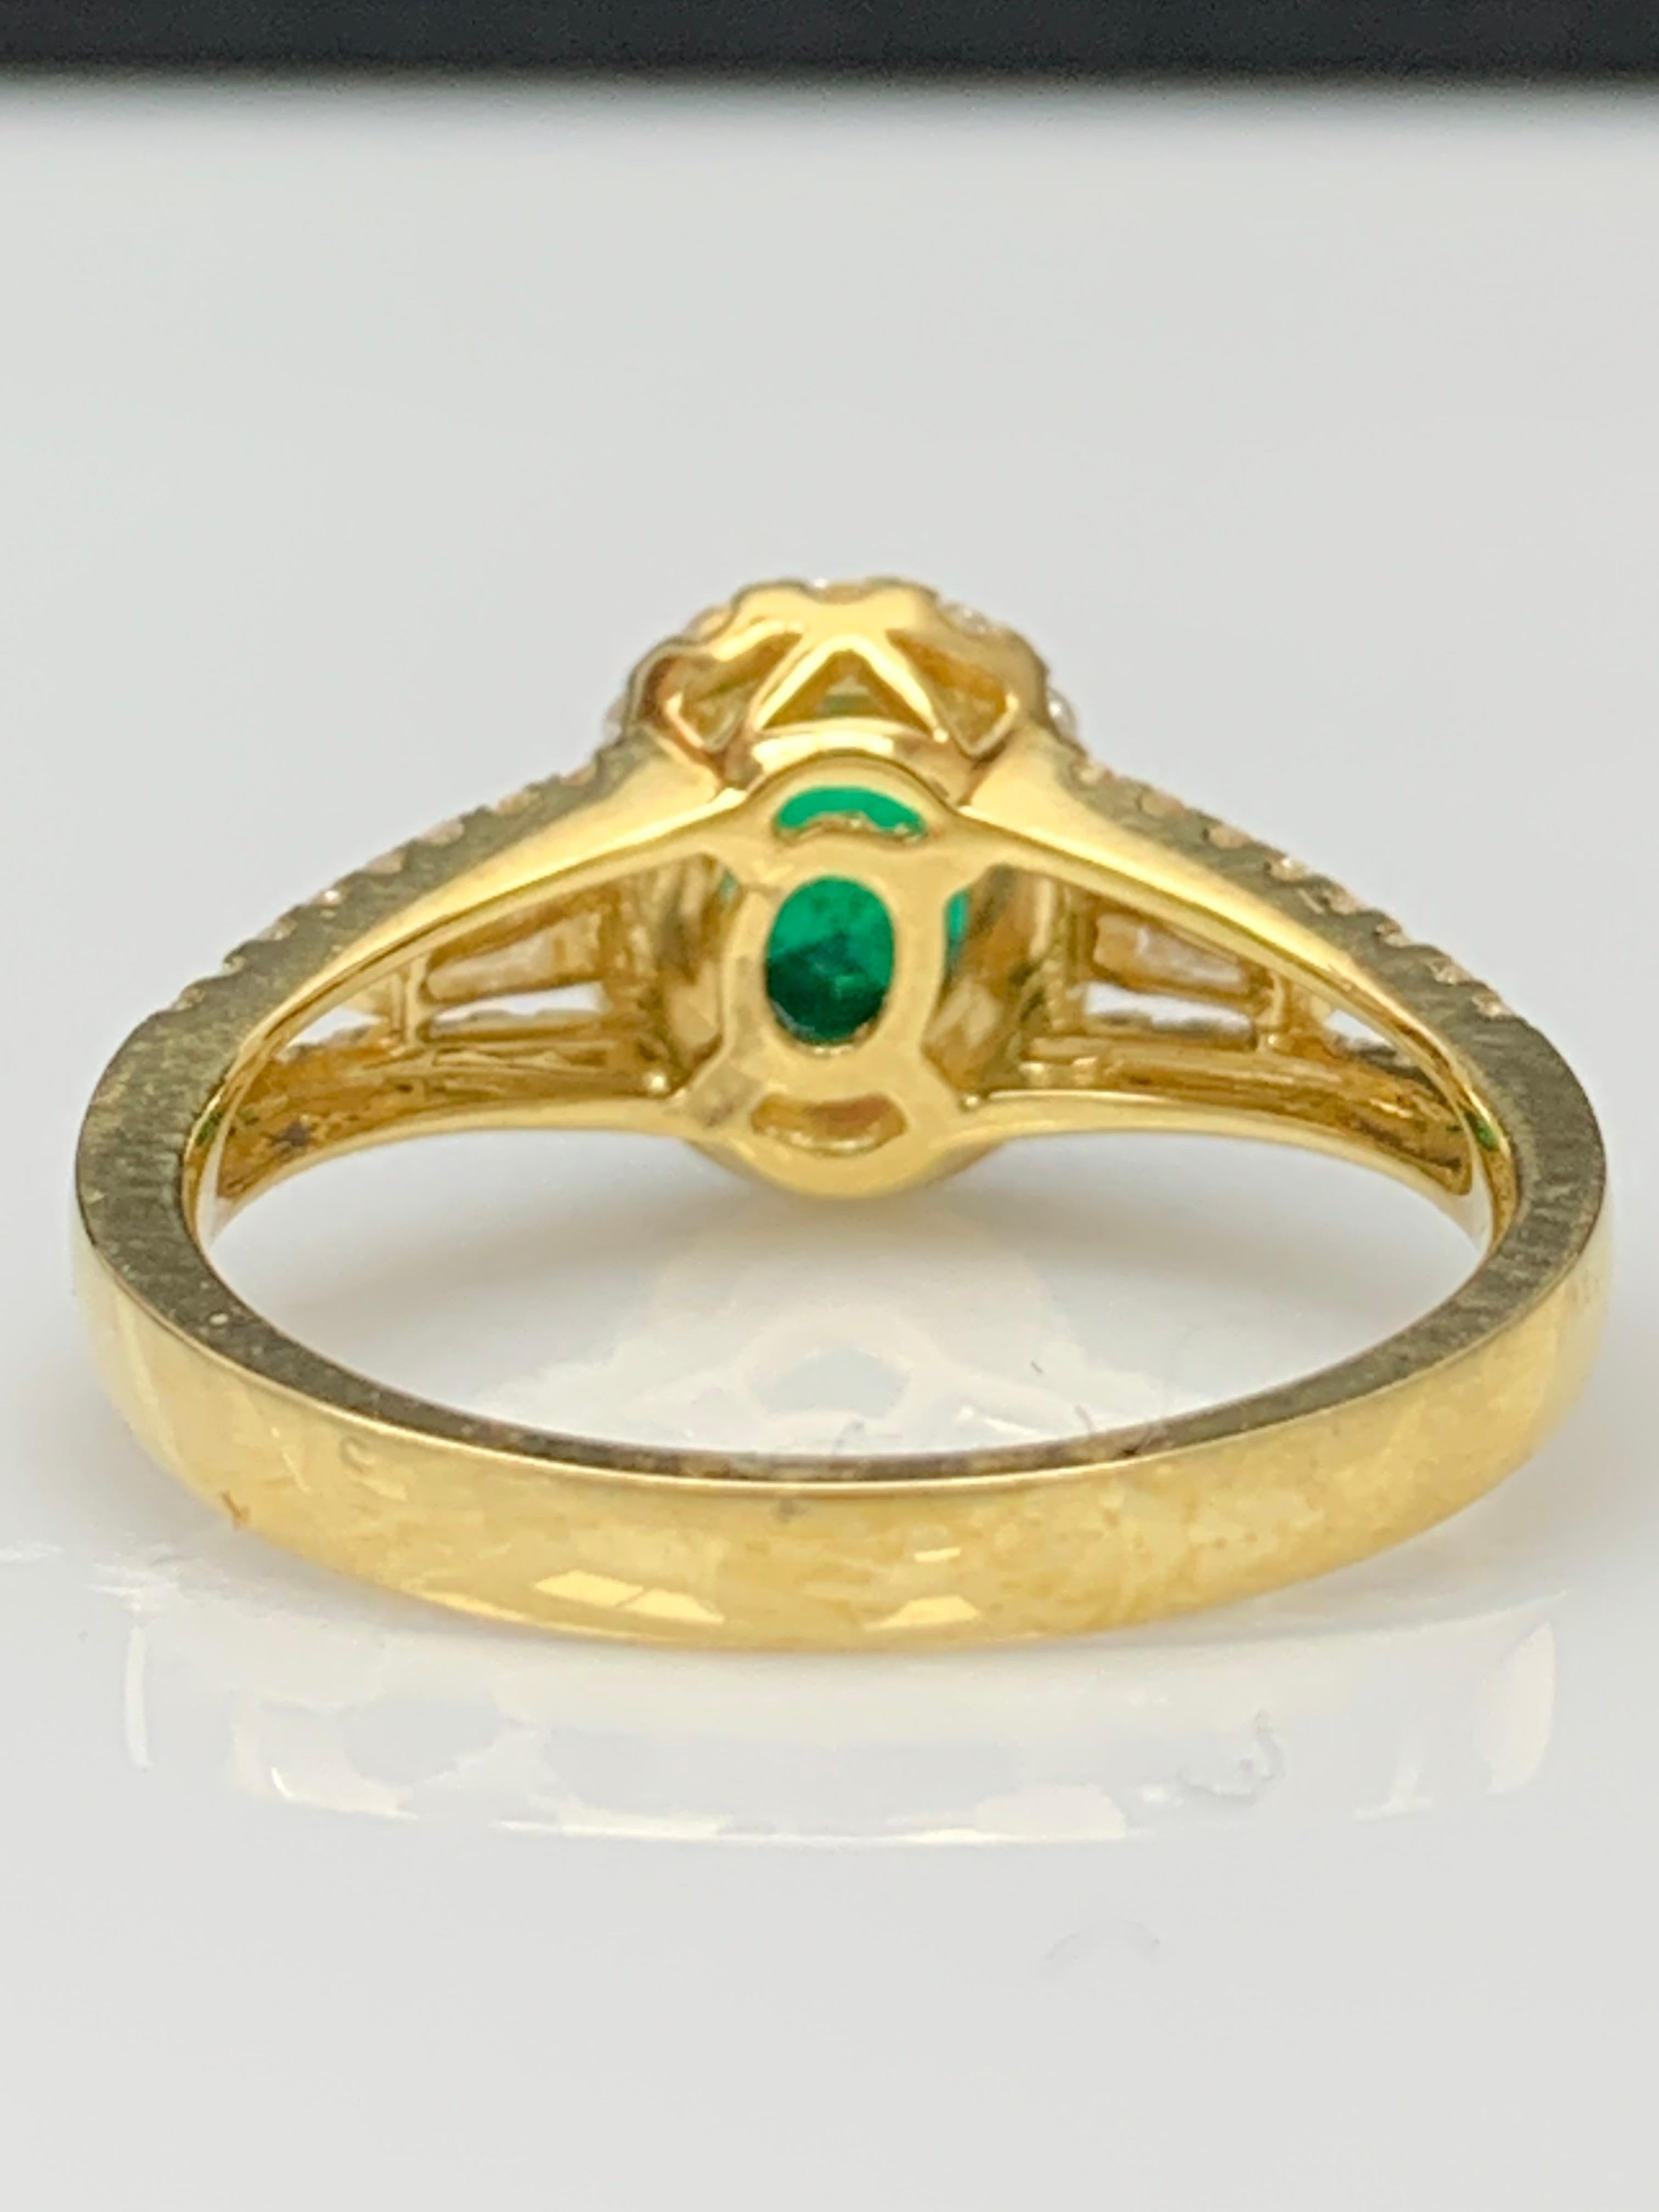 0.73 Carat Oval Cut Emerald and Diamond Ring in 18k Yellow Gold For Sale 8